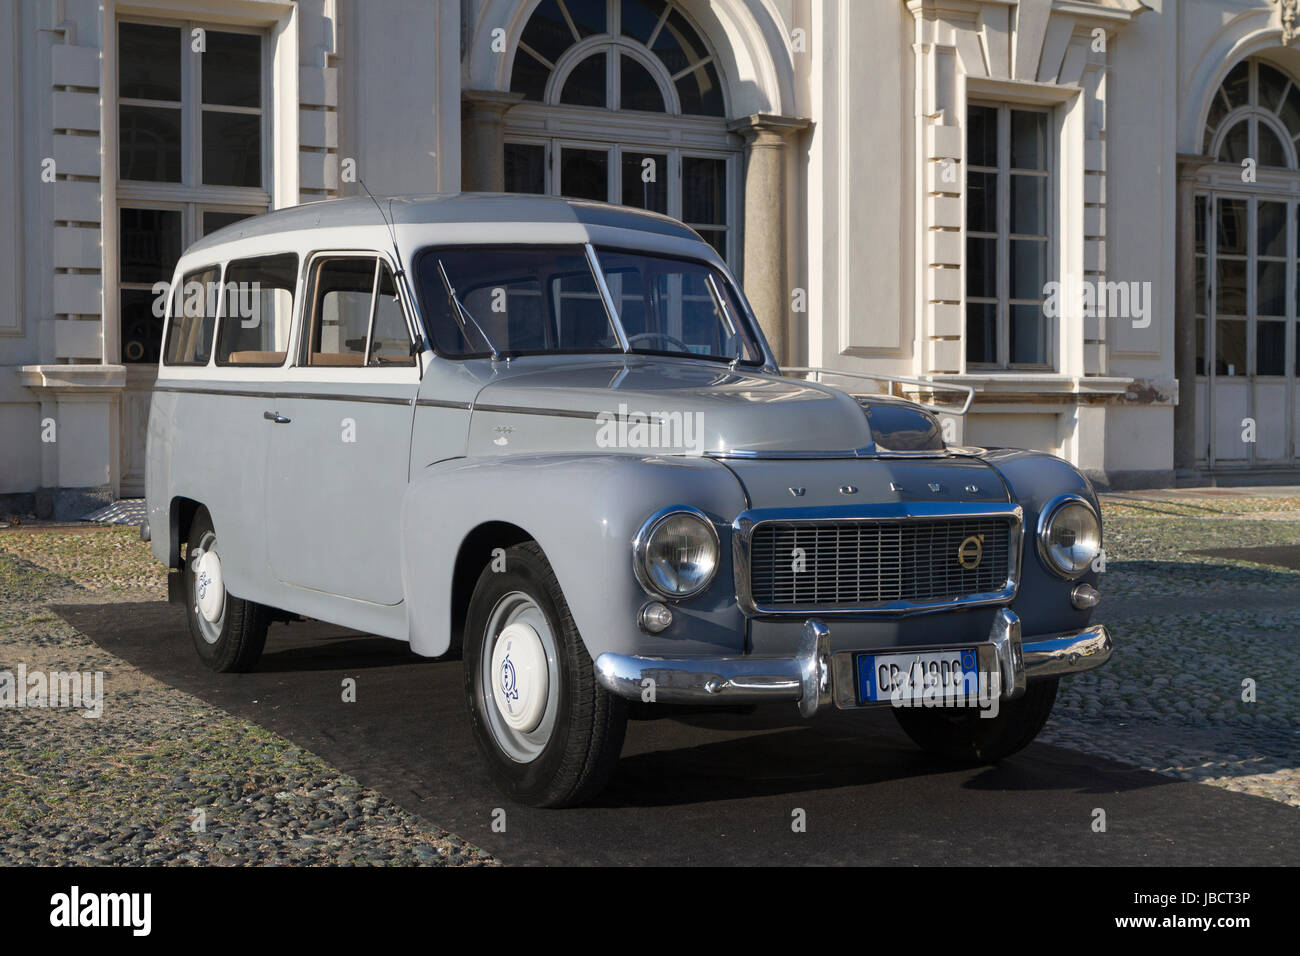 Turin, Italy, 10th June 2017. A 1955 Volvo Duett PV445. Volvo celebrates its 90th anniversary with a car exhibition in the court of Valentino Castle during Turin car show. Credit: Marco Destefanis/Alamy Live News Stock Photo